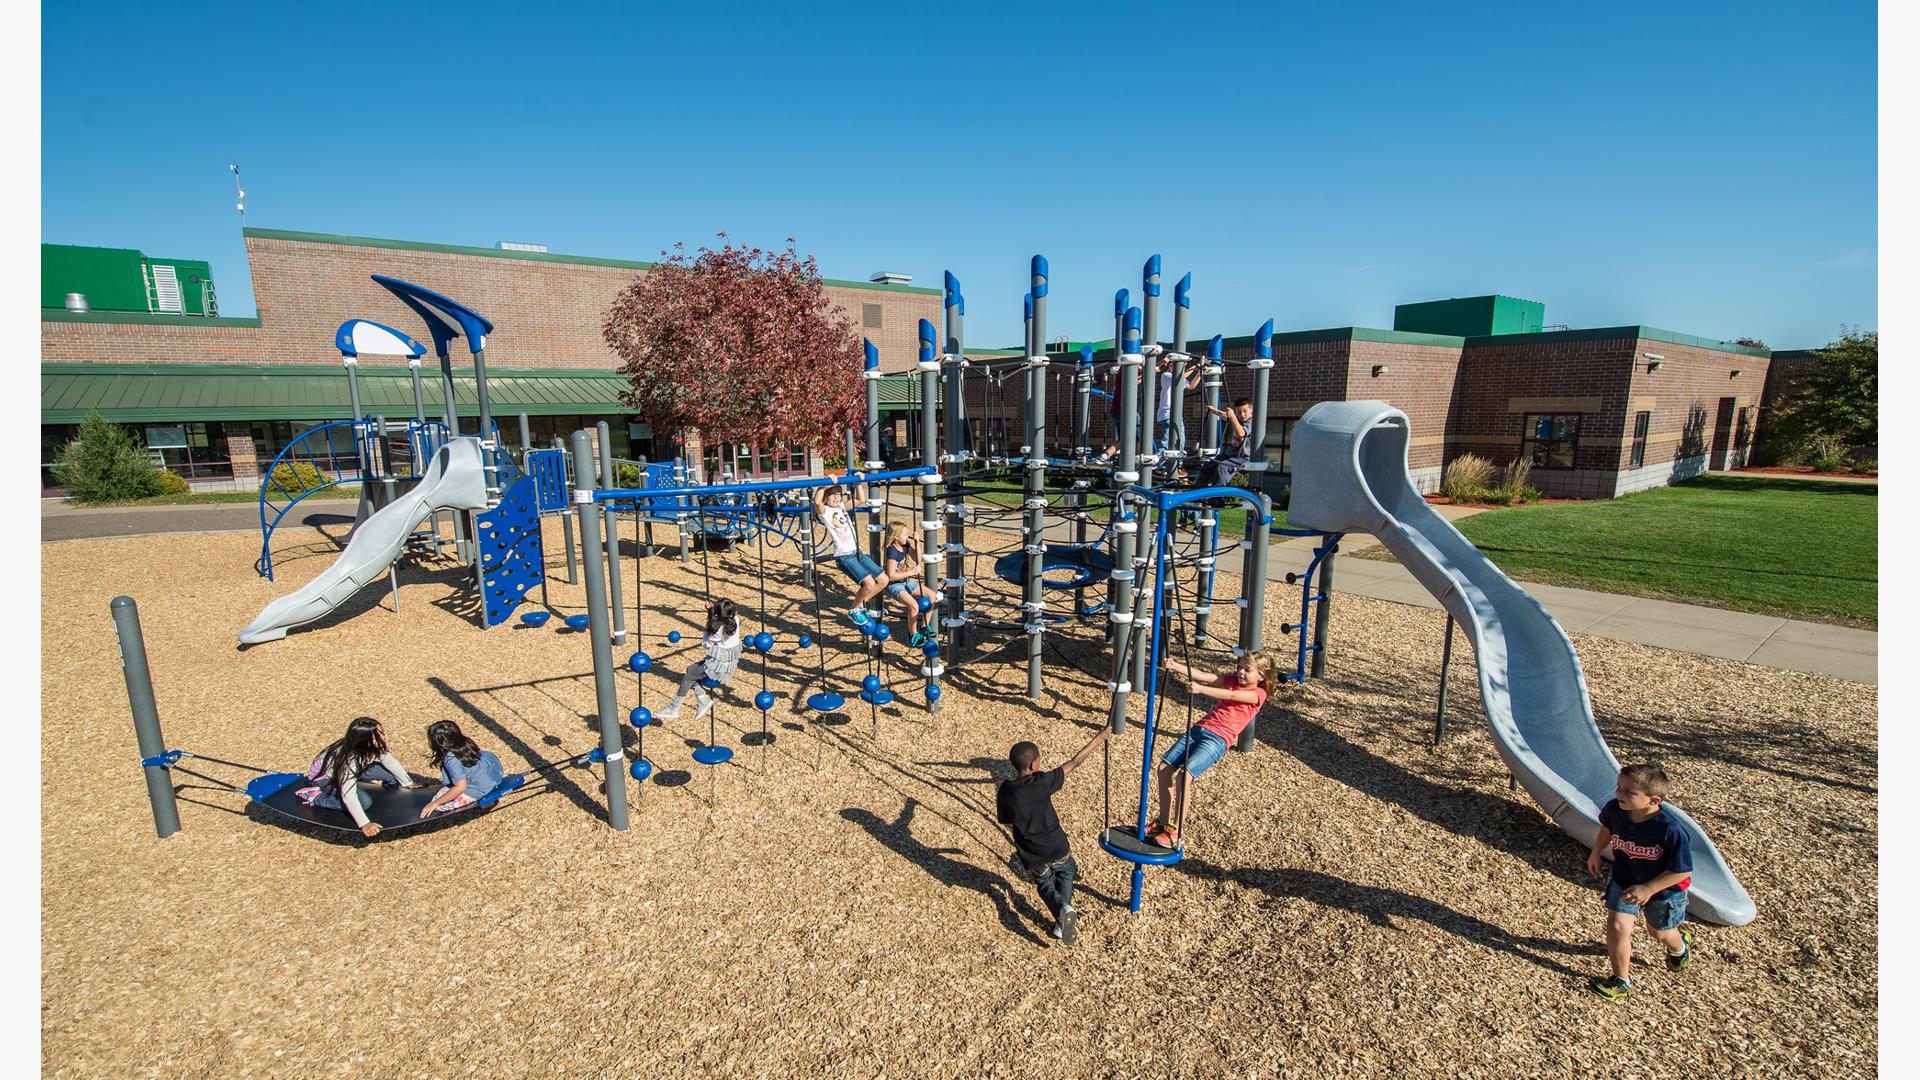 It's a sunny day at Otsego Elementary School. Children play on PlayBooster play system. Two girls sit on the Boogie Board. A boy runs past the slide, while a group of girls play on the Disc Challenge.